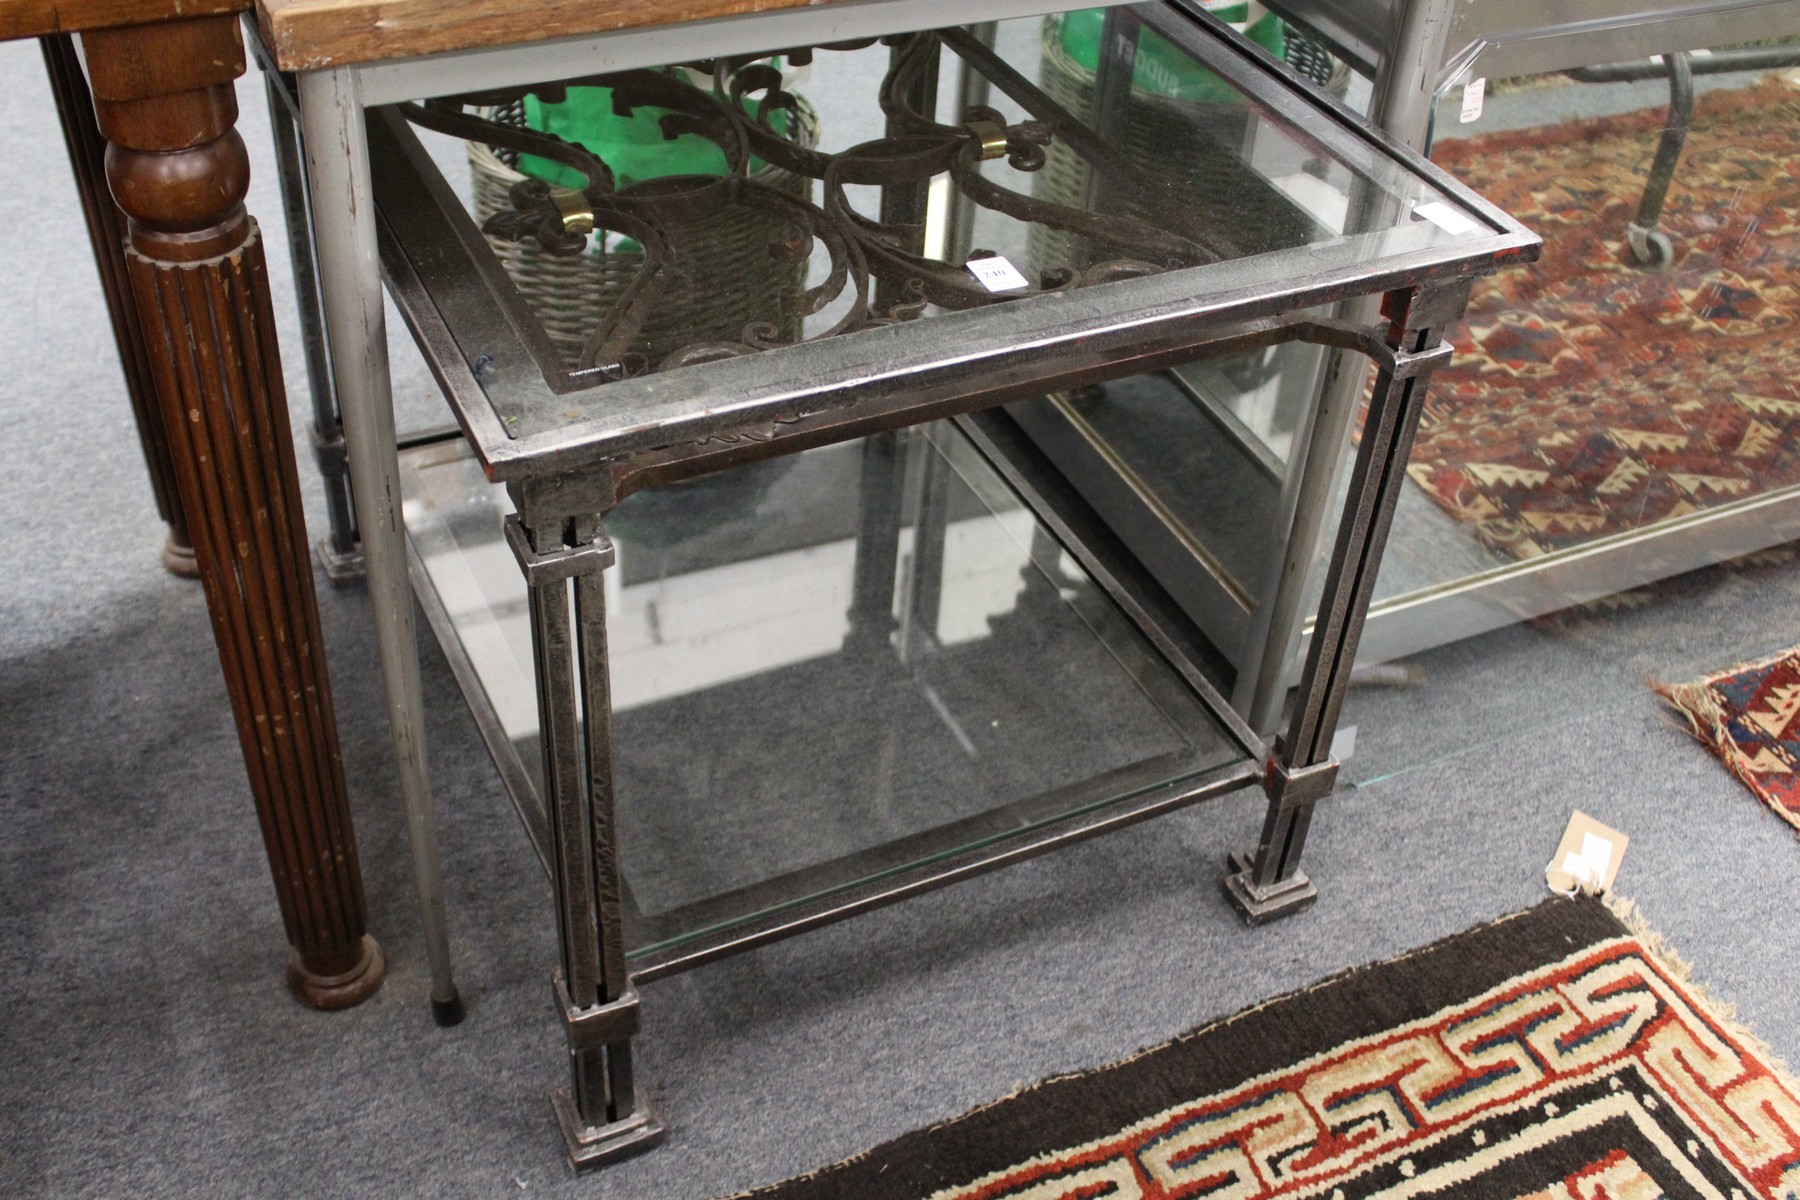 An ornate wrought iron and glass two tier coffee table.